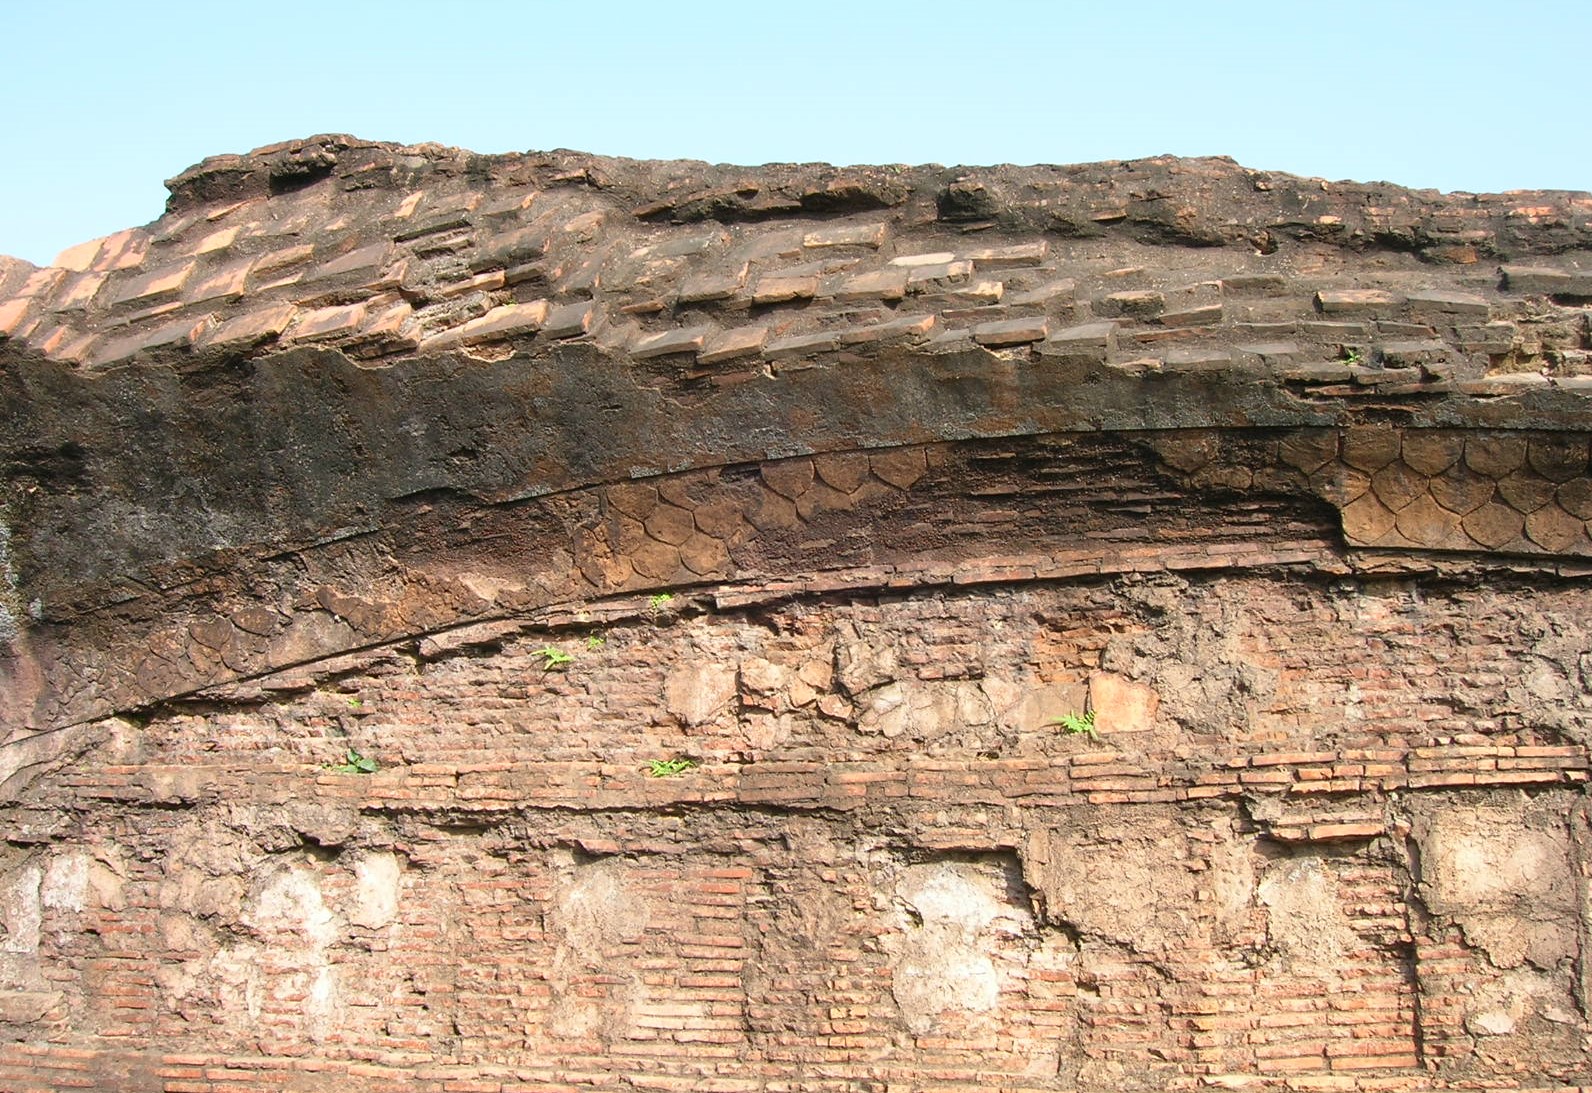 A close view of the brick-work at Talatal Ghar. Image Source: Wikimedia Commons